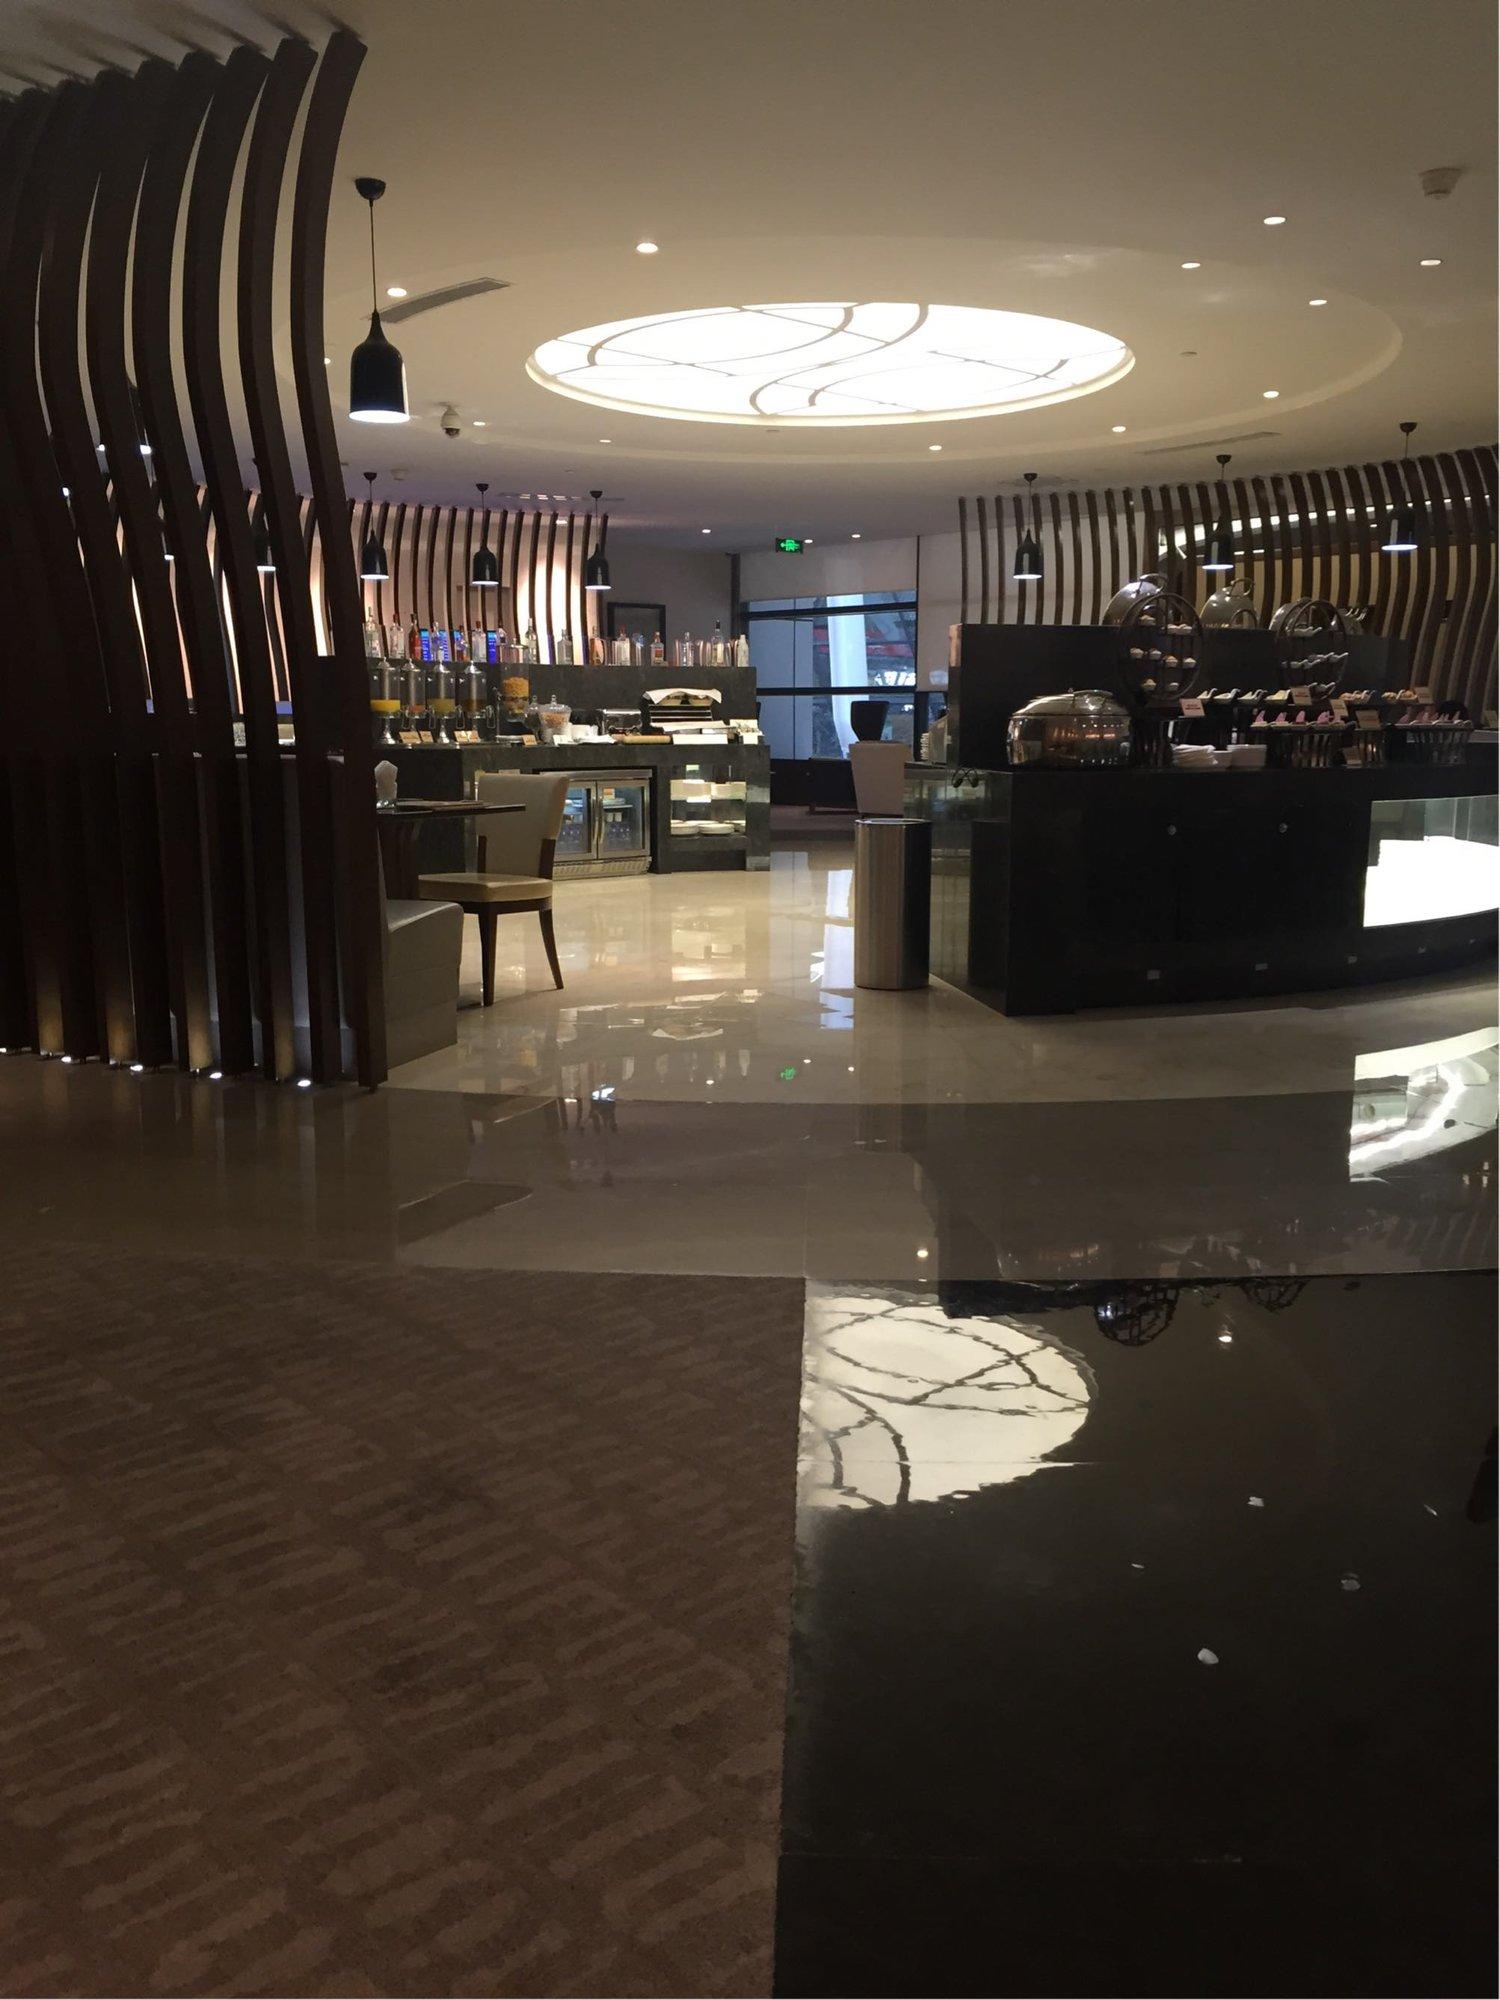 No. 71 Air China First Class Lounge image 3 of 10